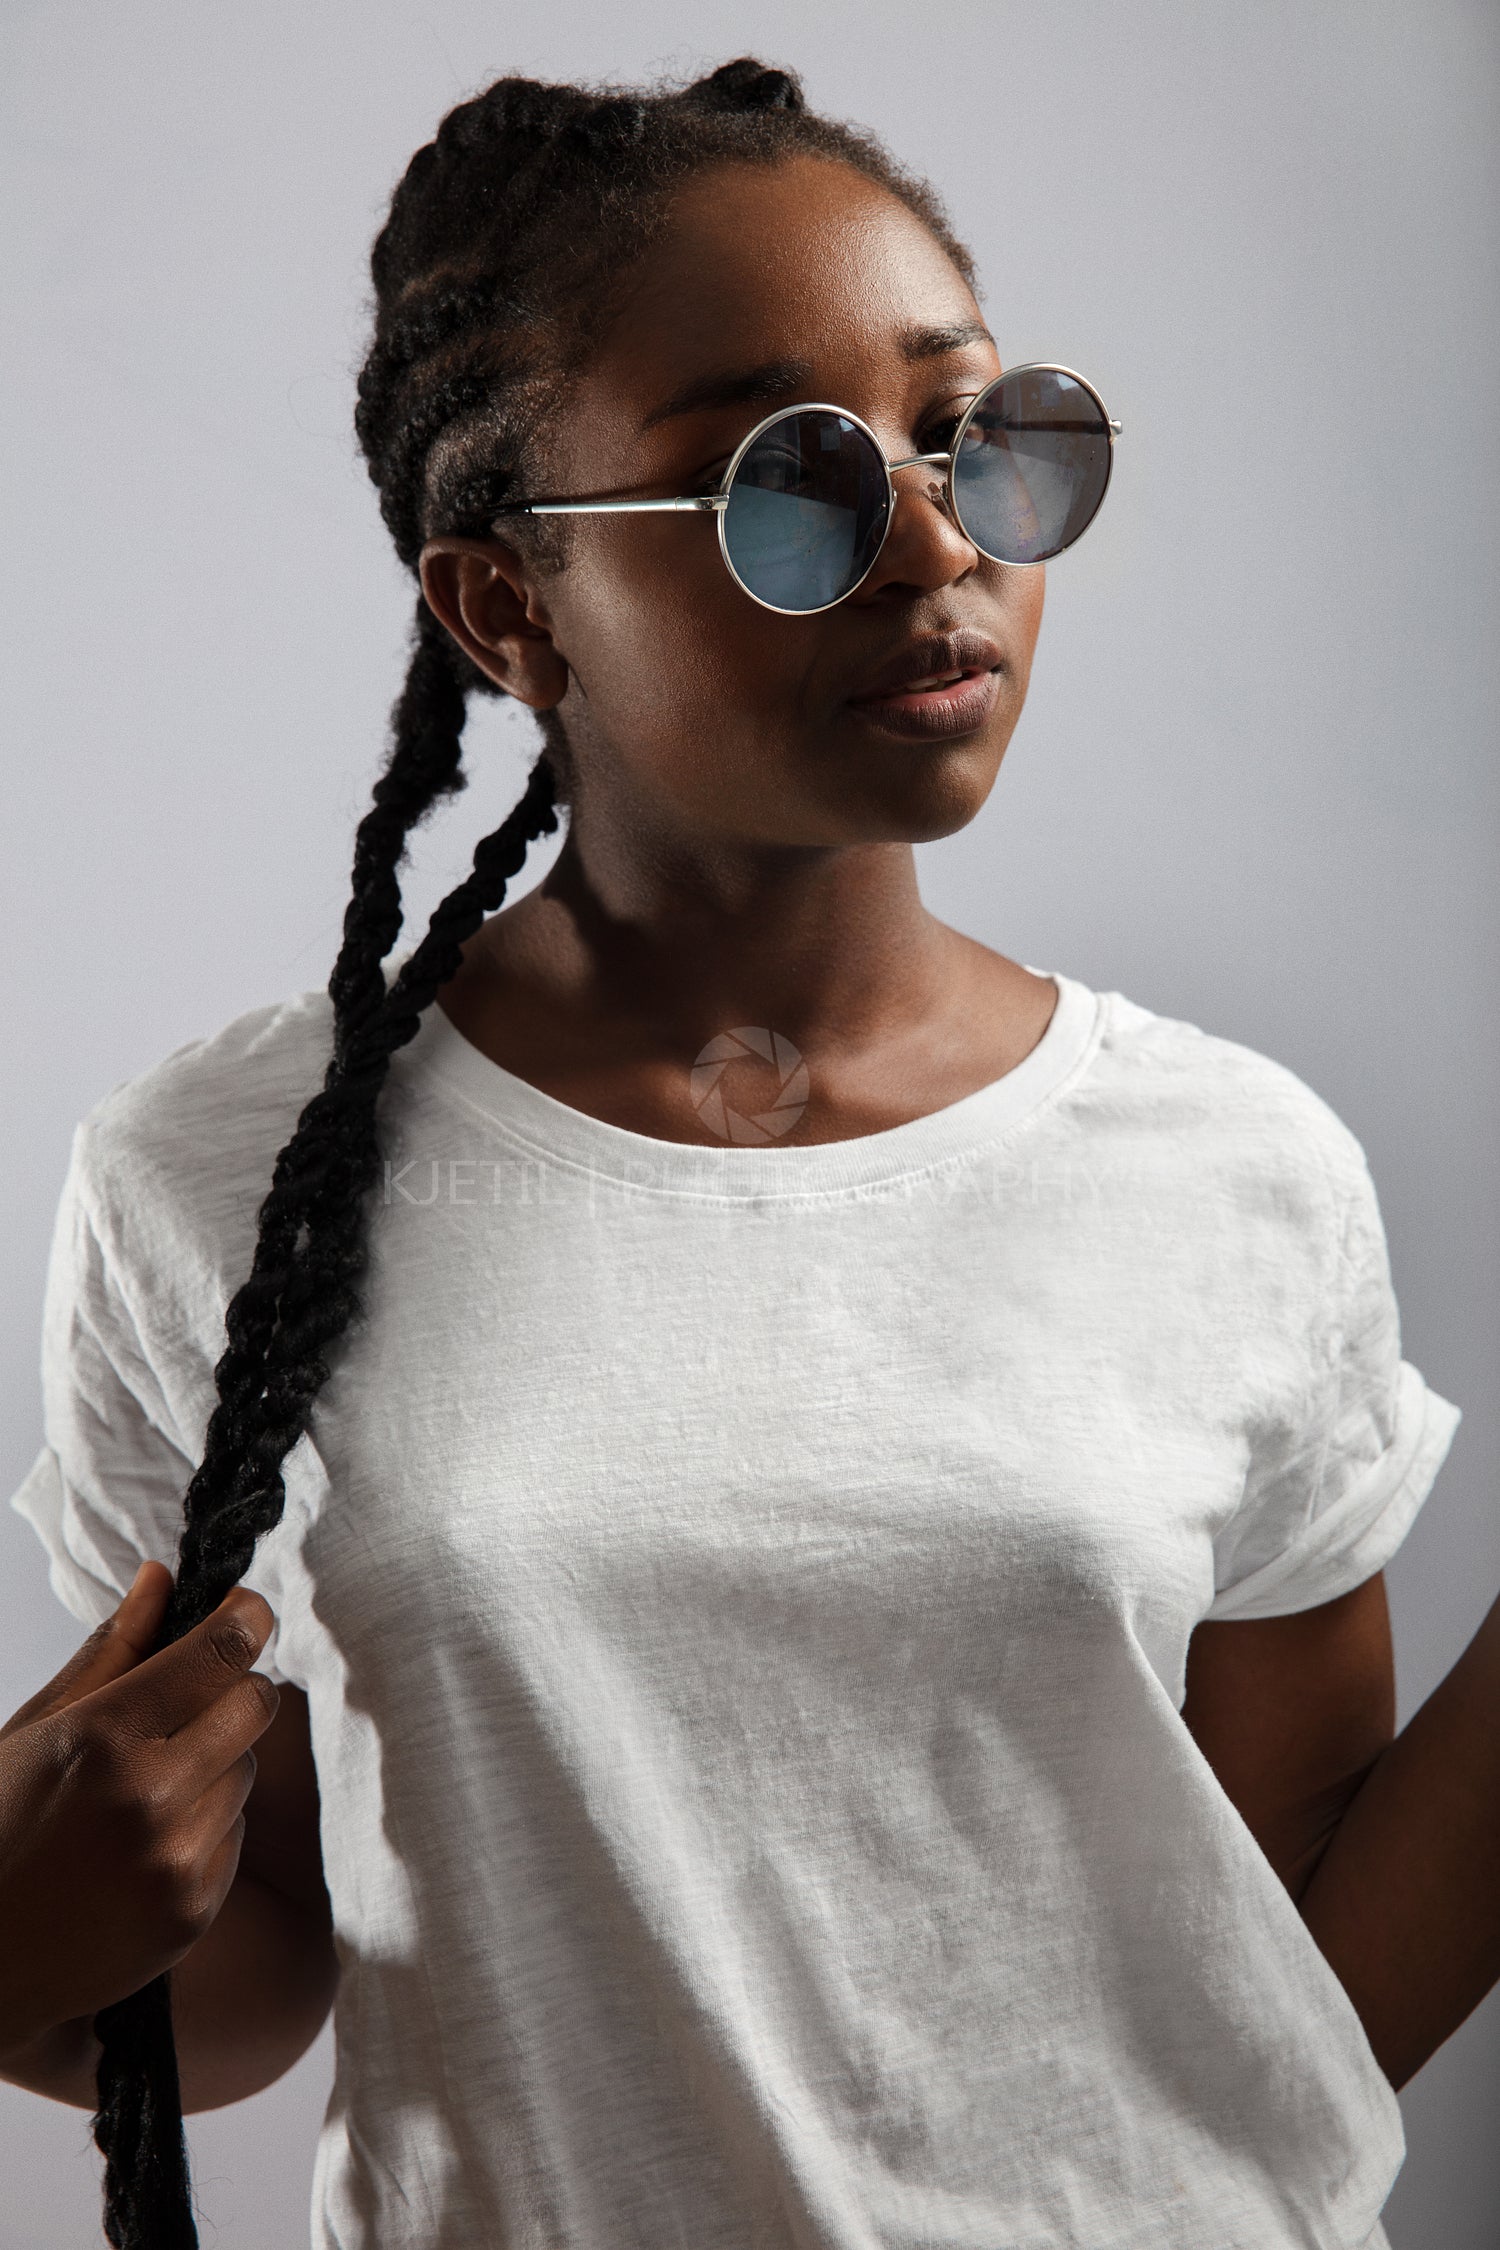 Cool Female Model With Braided Hair and Sunglasses Over Gray Background